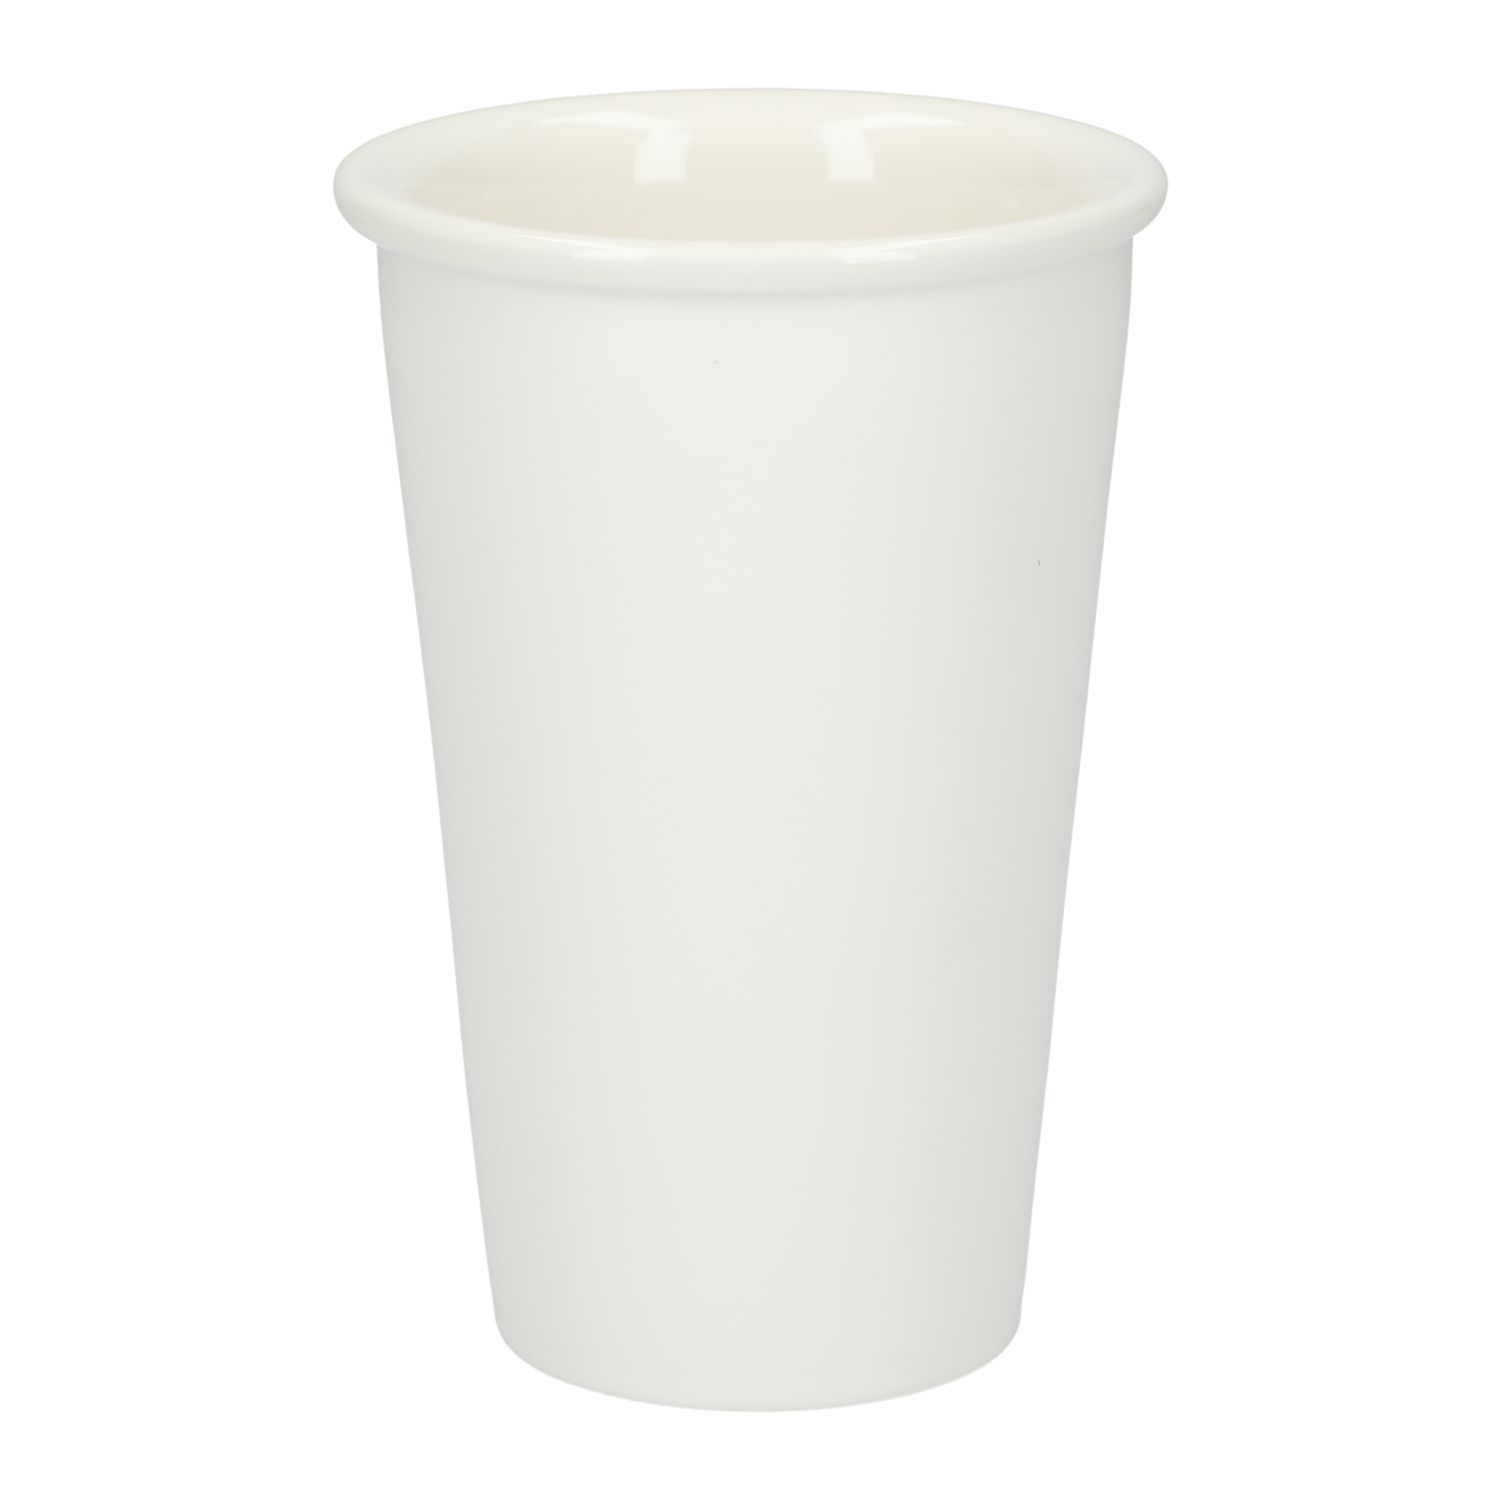 LEEDS 1600-73 - Dimple Double Wall Ceramic Cup 10oz